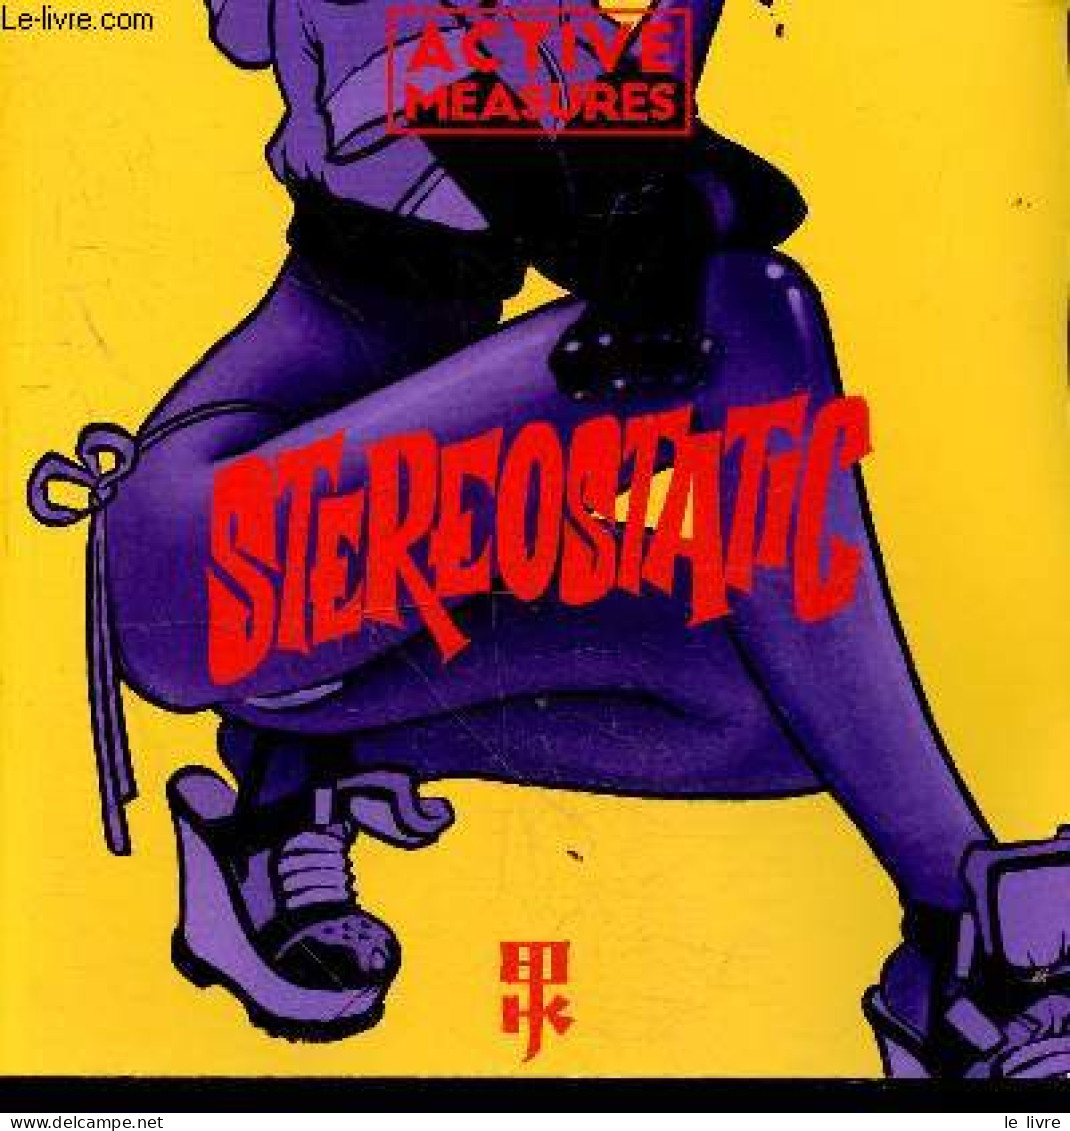 ACTIVE MEASURES Vol. 1 - Stereostatic - COLLECTIF - 2018 - Taalkunde